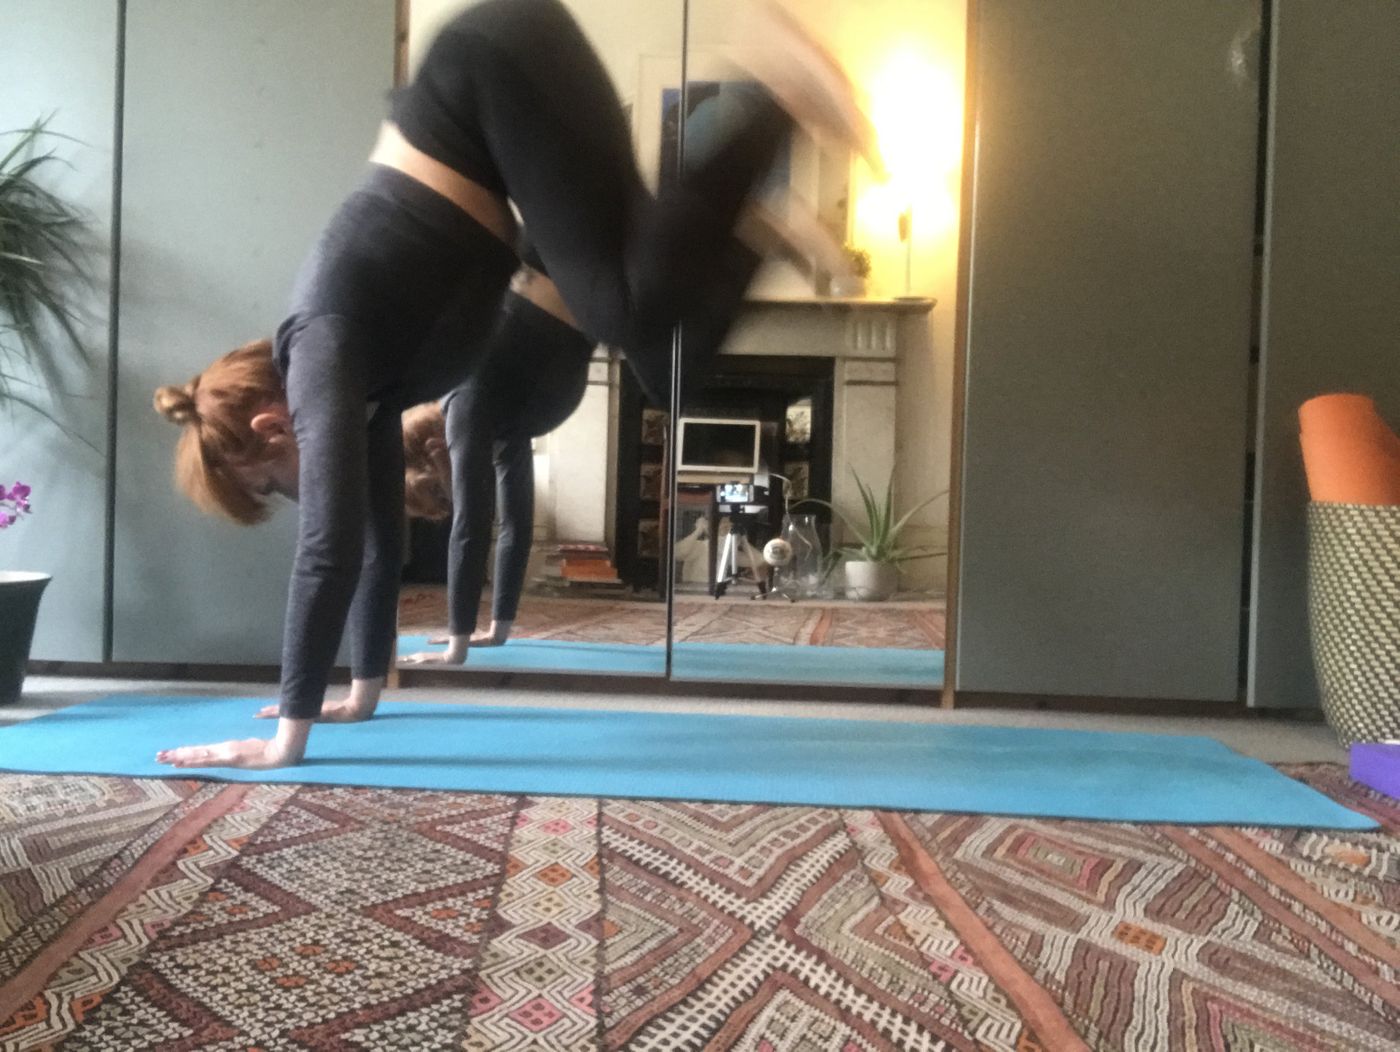 https://bua.fit/class/nGUR7SEY9srB 
Easter is coming up which means chocolate, chocolate and bunnies...This Friday is an extra long 90 min Goddess Flow Vinyasa special at the earlier time of 10am where we get to hop like bunnies, bloom like daffodils and then have the rest of the day to eat chocolate..Goals..